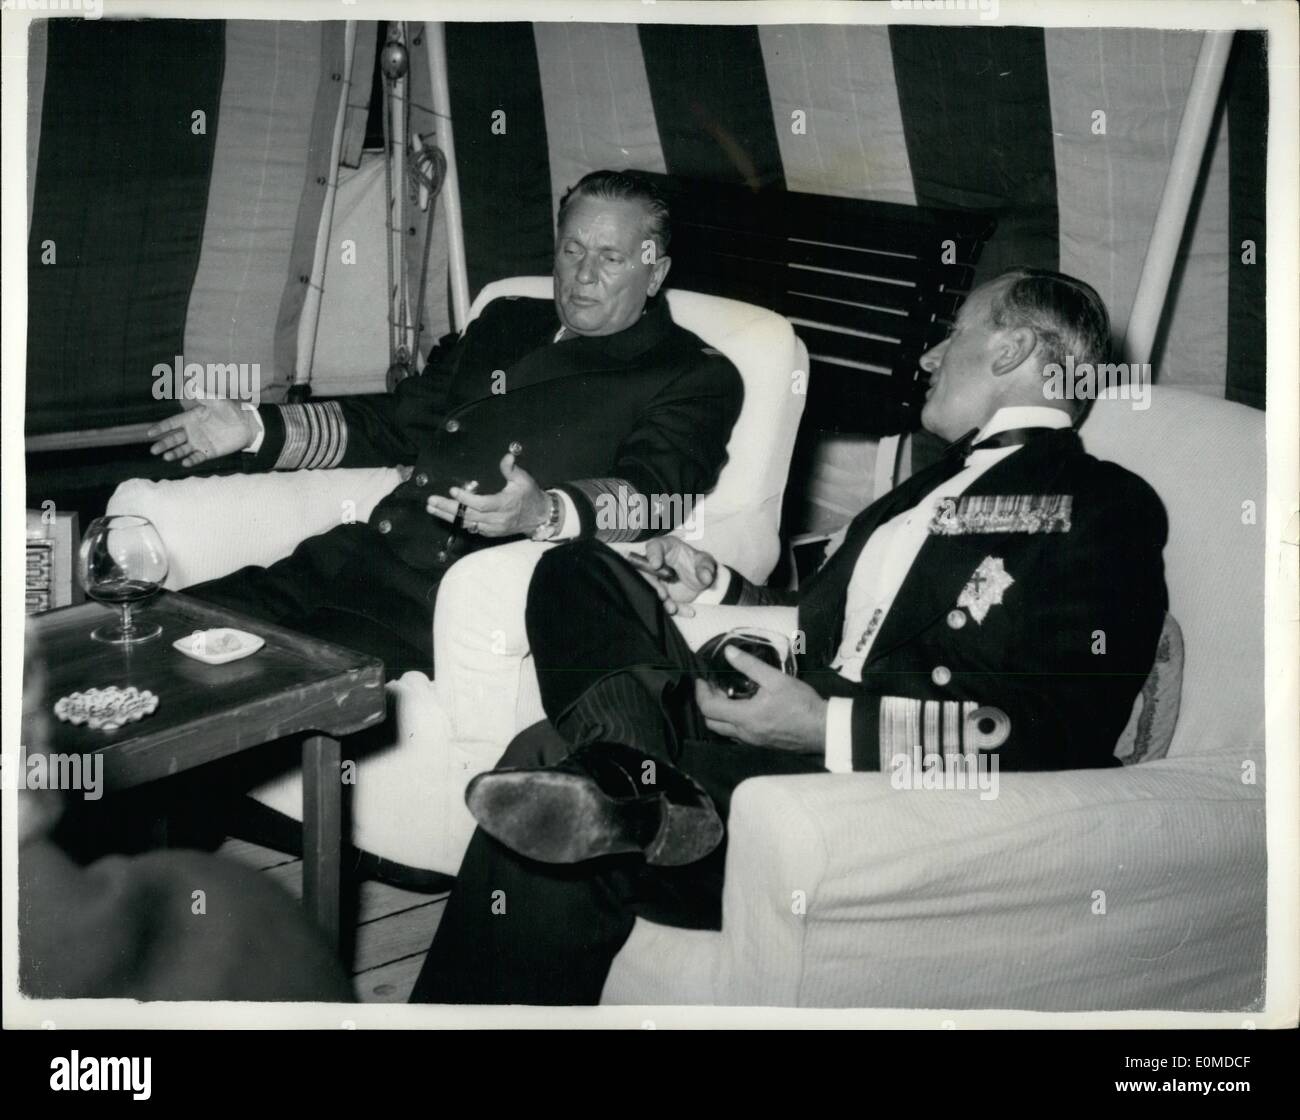 Oct. 10, 1954 - Admiral Mountbatten says farewell to president Tito: Admiral the earl Mounbatten of Buran, K.G., K.C.B., G.C.V.O., G.M.S.I., D.S.O, flying his flag in the dispaton vessel Surprise, arrived off the island of Brioni, Yugaslavia, recently. After firing a personal salute to president Tito on the North Side of the Island in sight of the President's House , H.M.S. surprise are horde off the harbor on the South side of the island. Admiral Mountbatten was paying a farewell call on president Tito before relinguishing his command of the Mediterranean Flest later this year Stock Photo